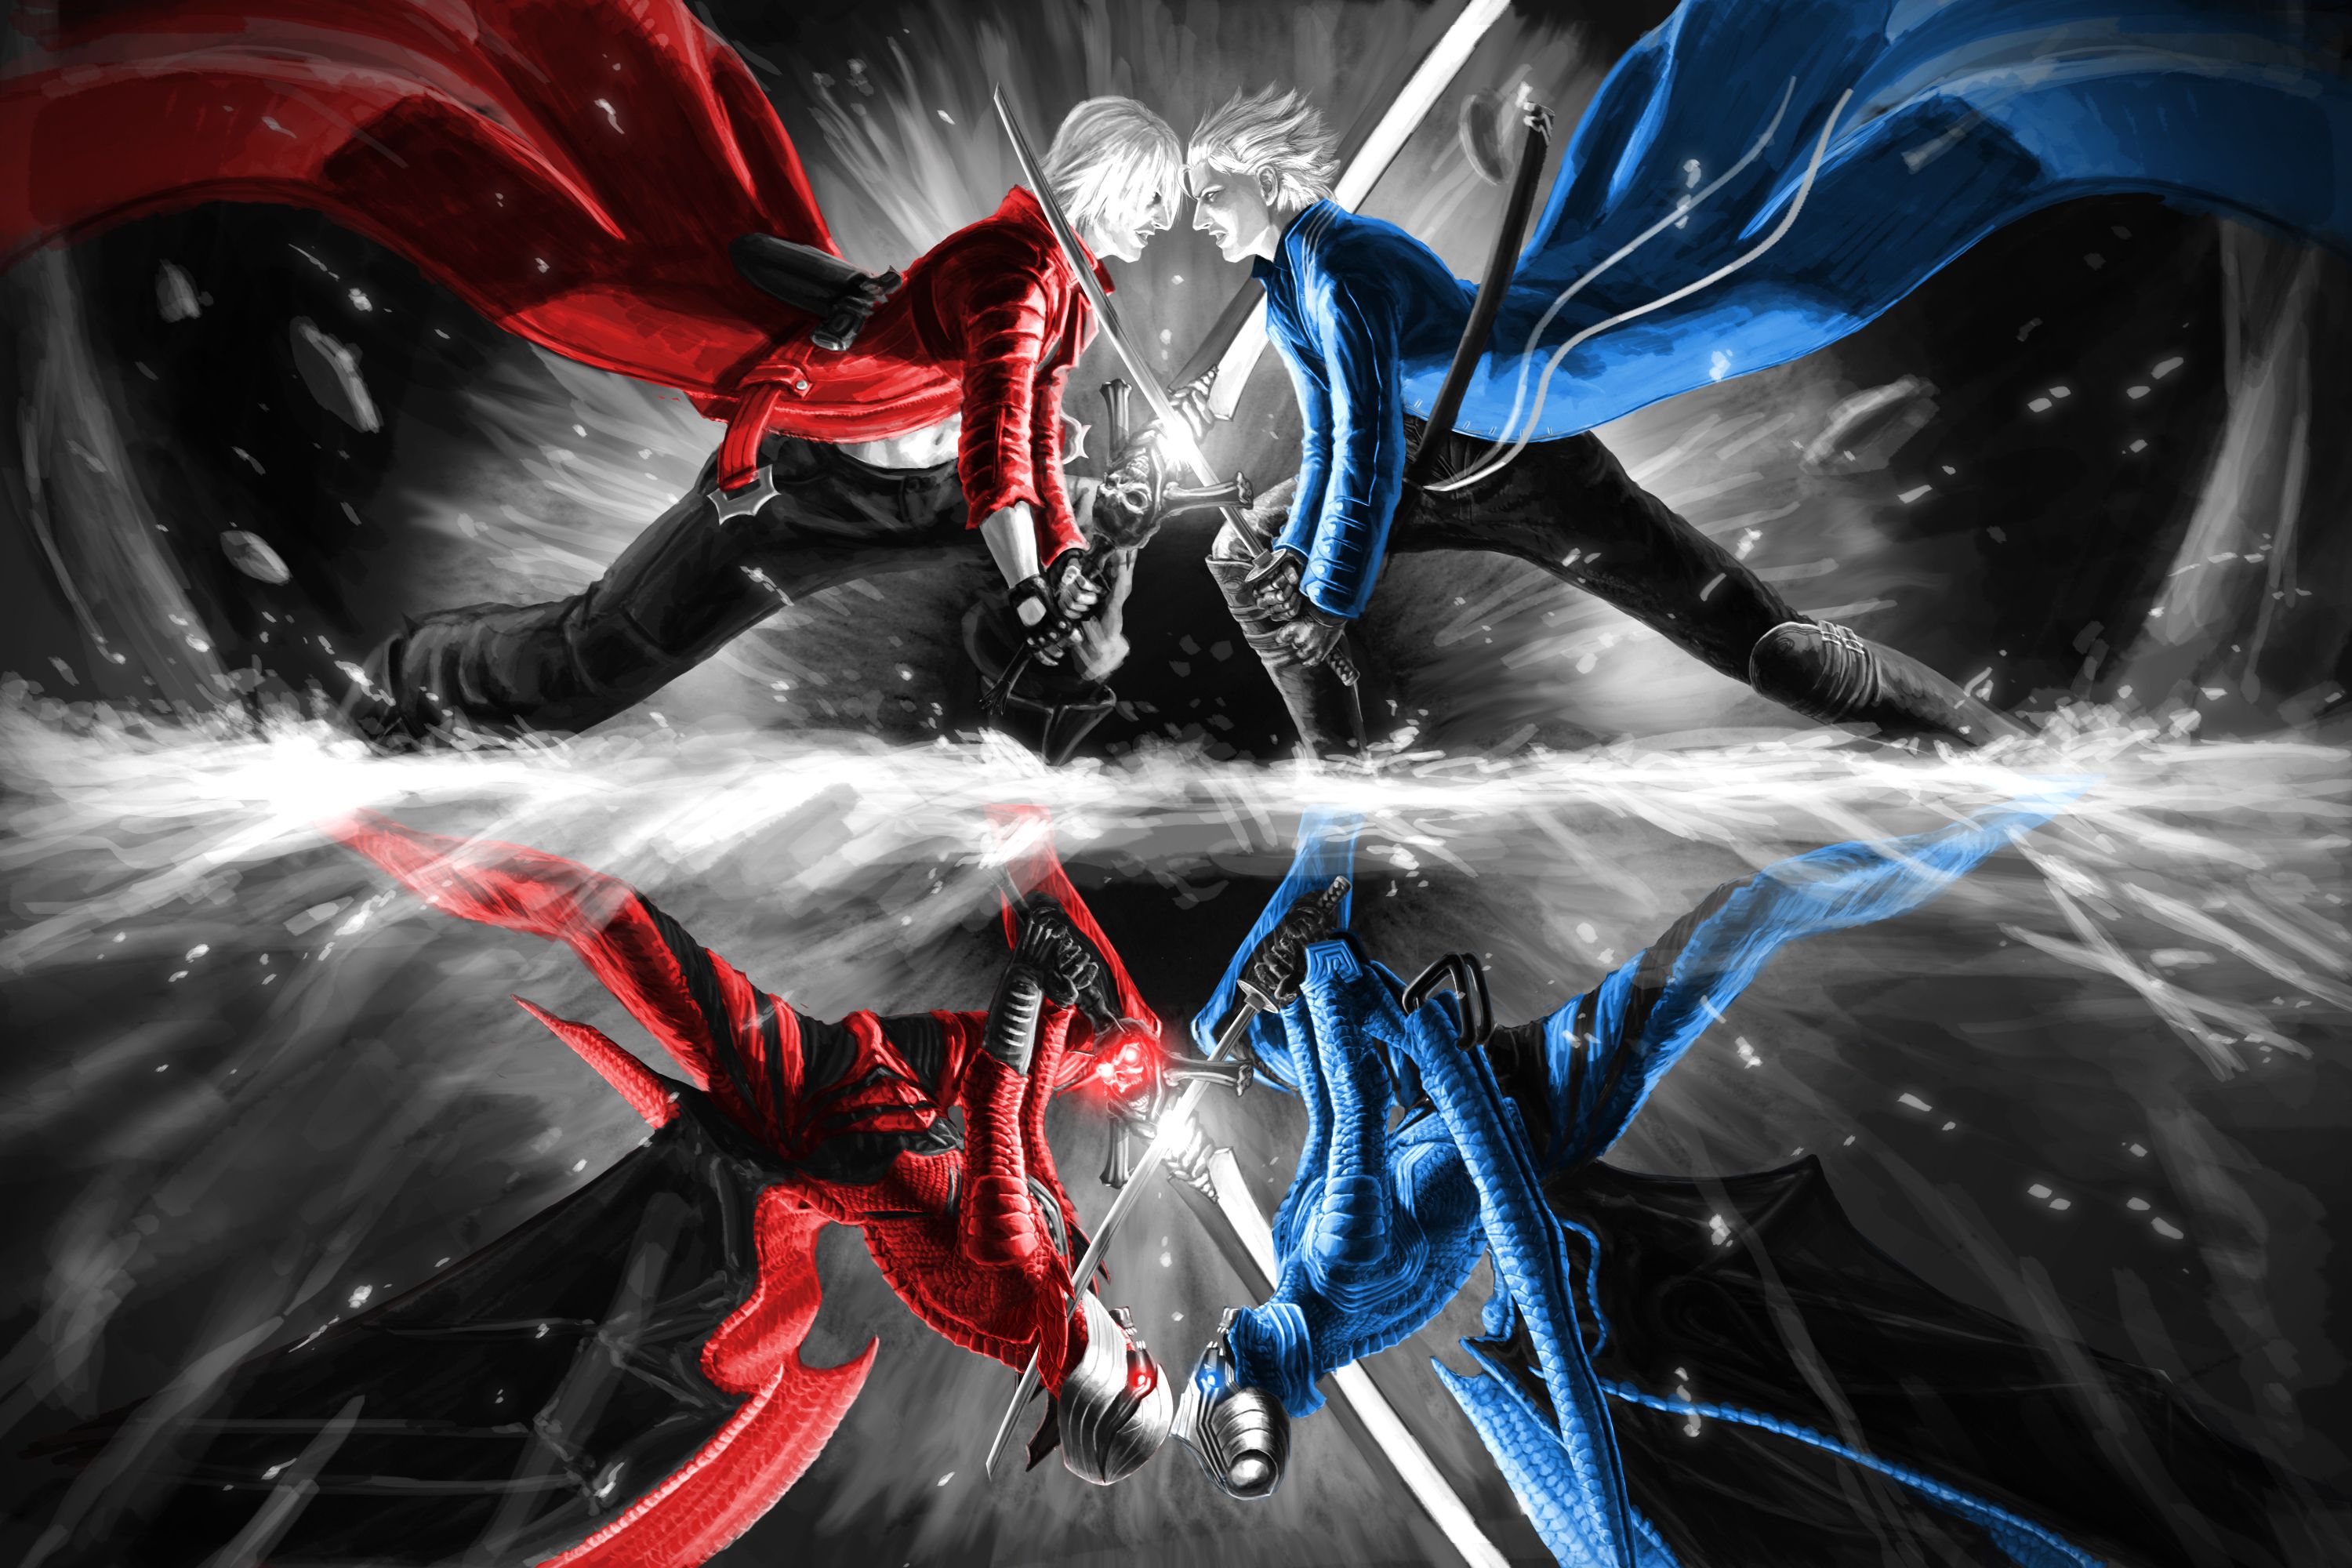 Wallpapers Devil May Cry Dante Games Image Download